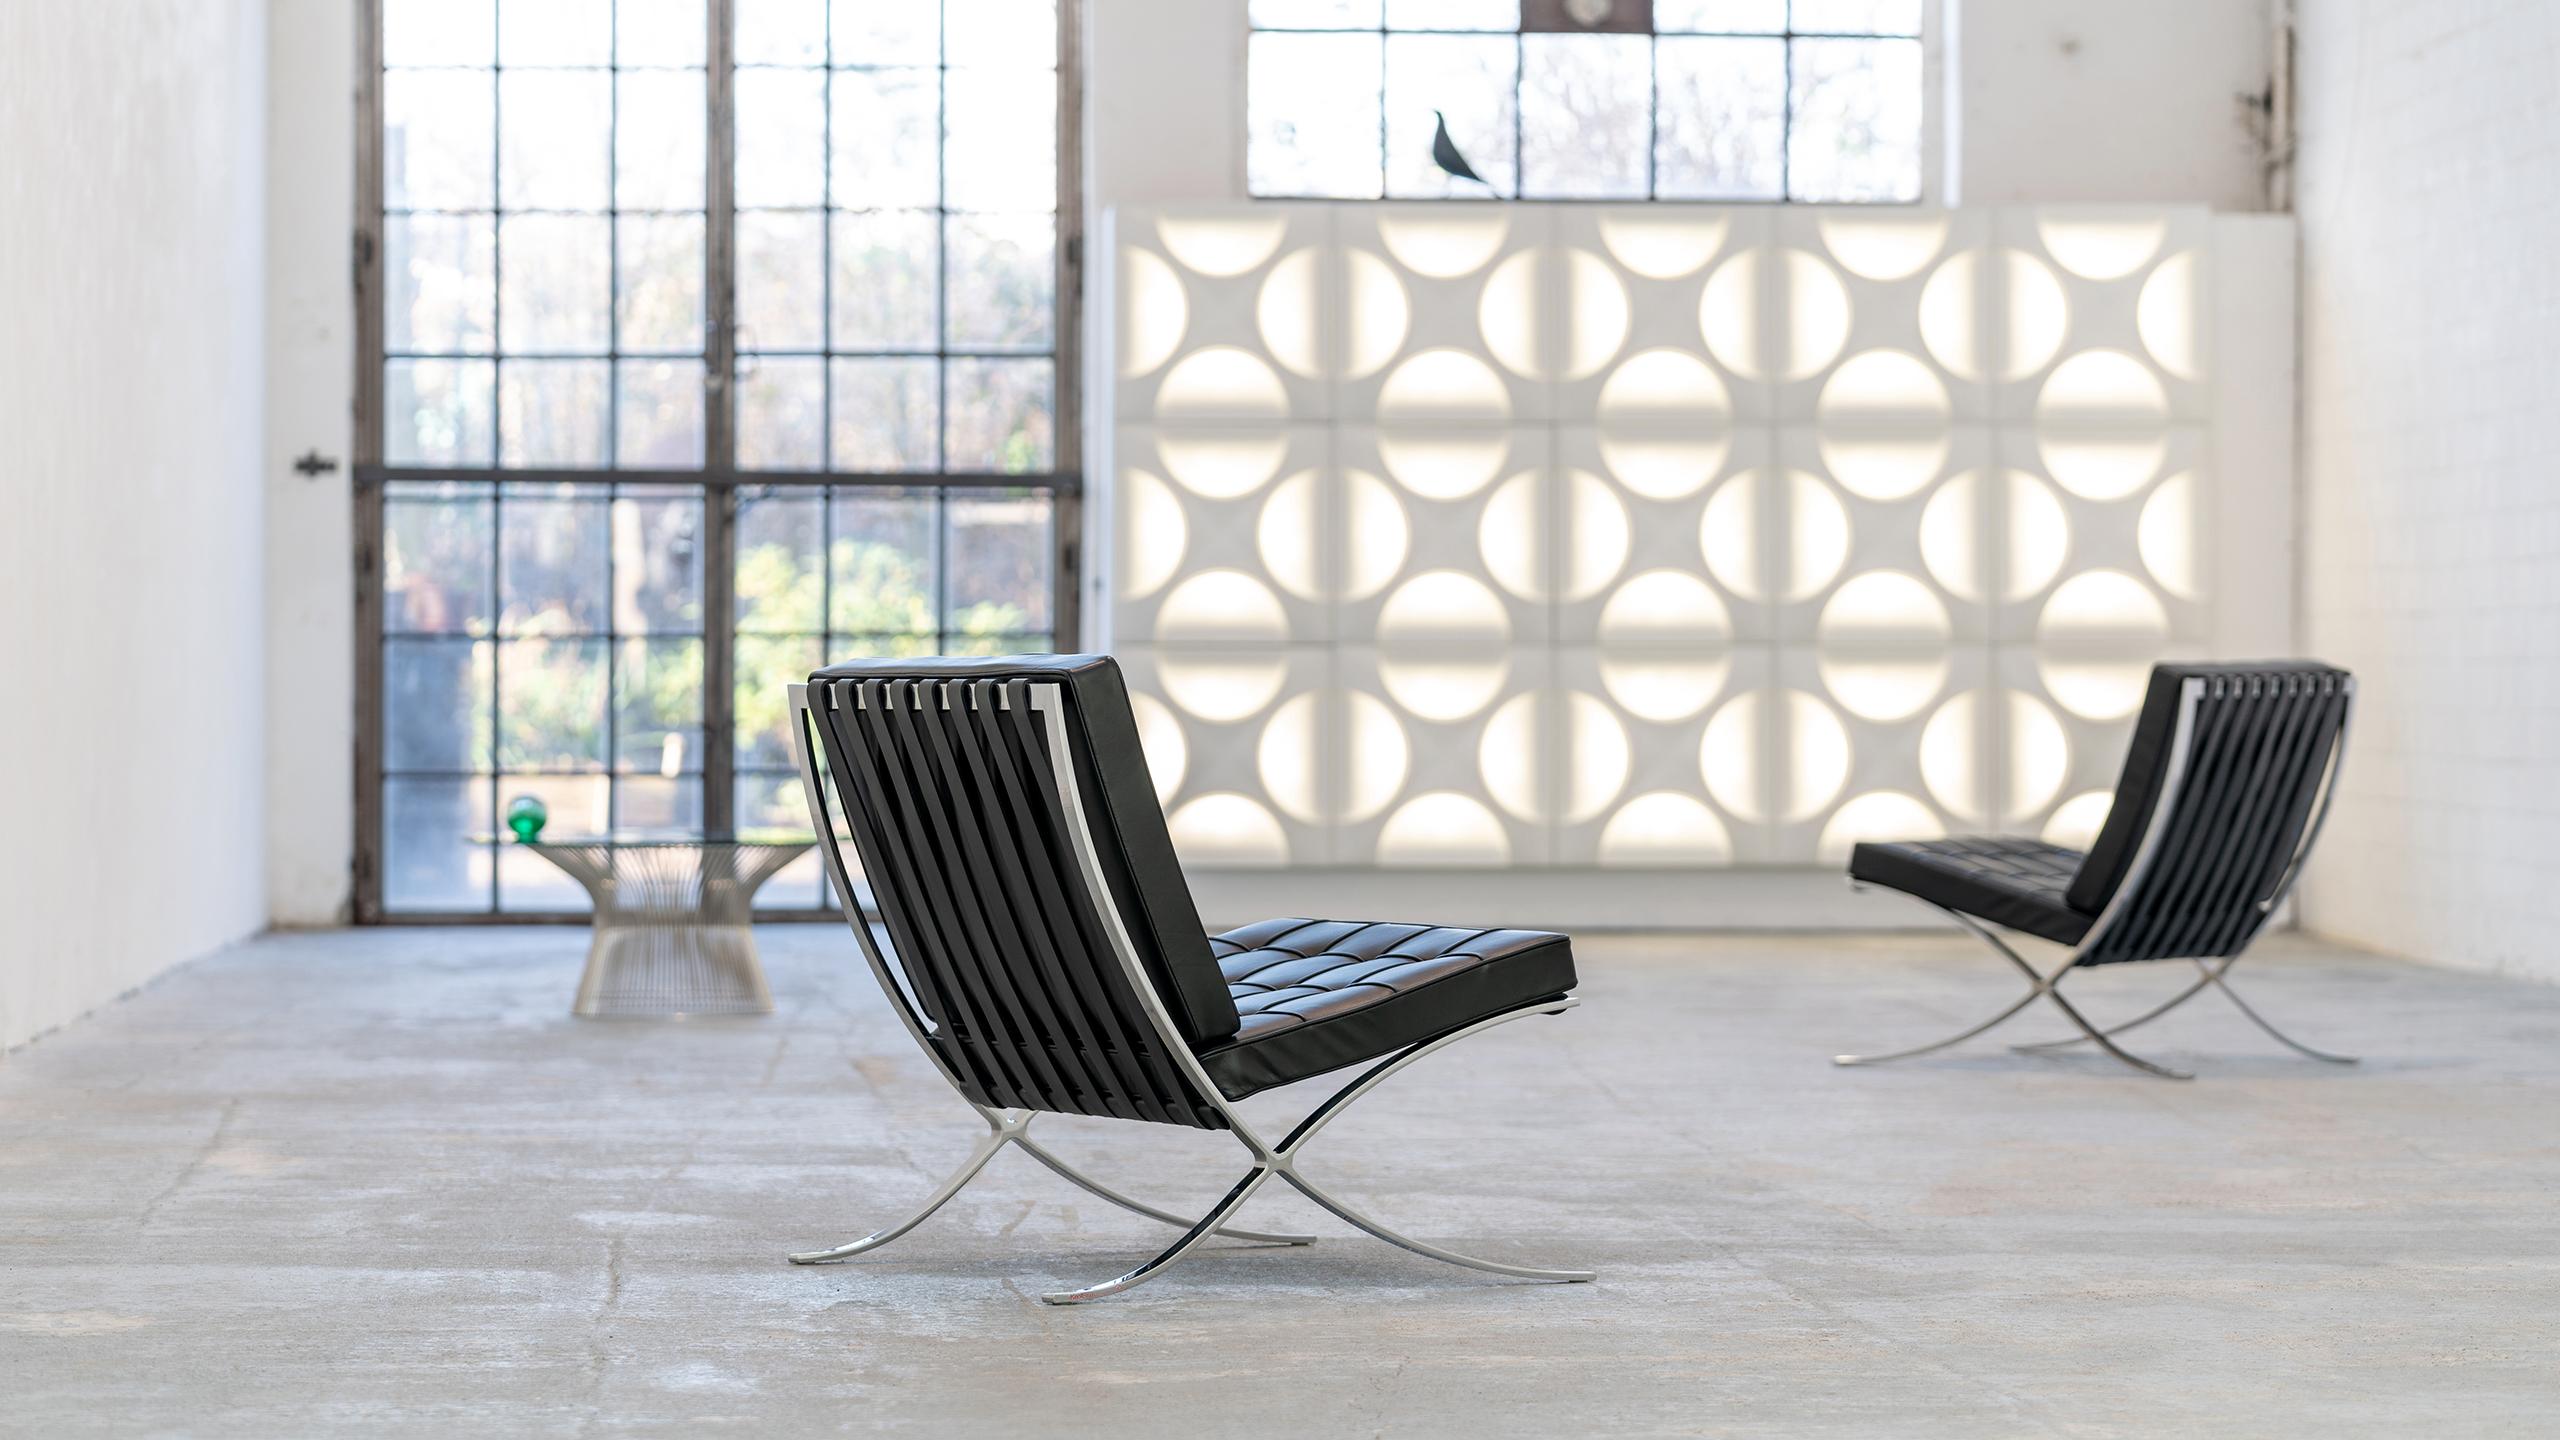 Beautiful Barcelona chair by Ludwig Mies van der Rohe, designed in 1962 for Knoll International.
(this offer is for one chair, the other one can be found in our other listings)

Chrome-plated steel frame with black leather.
The chairs are